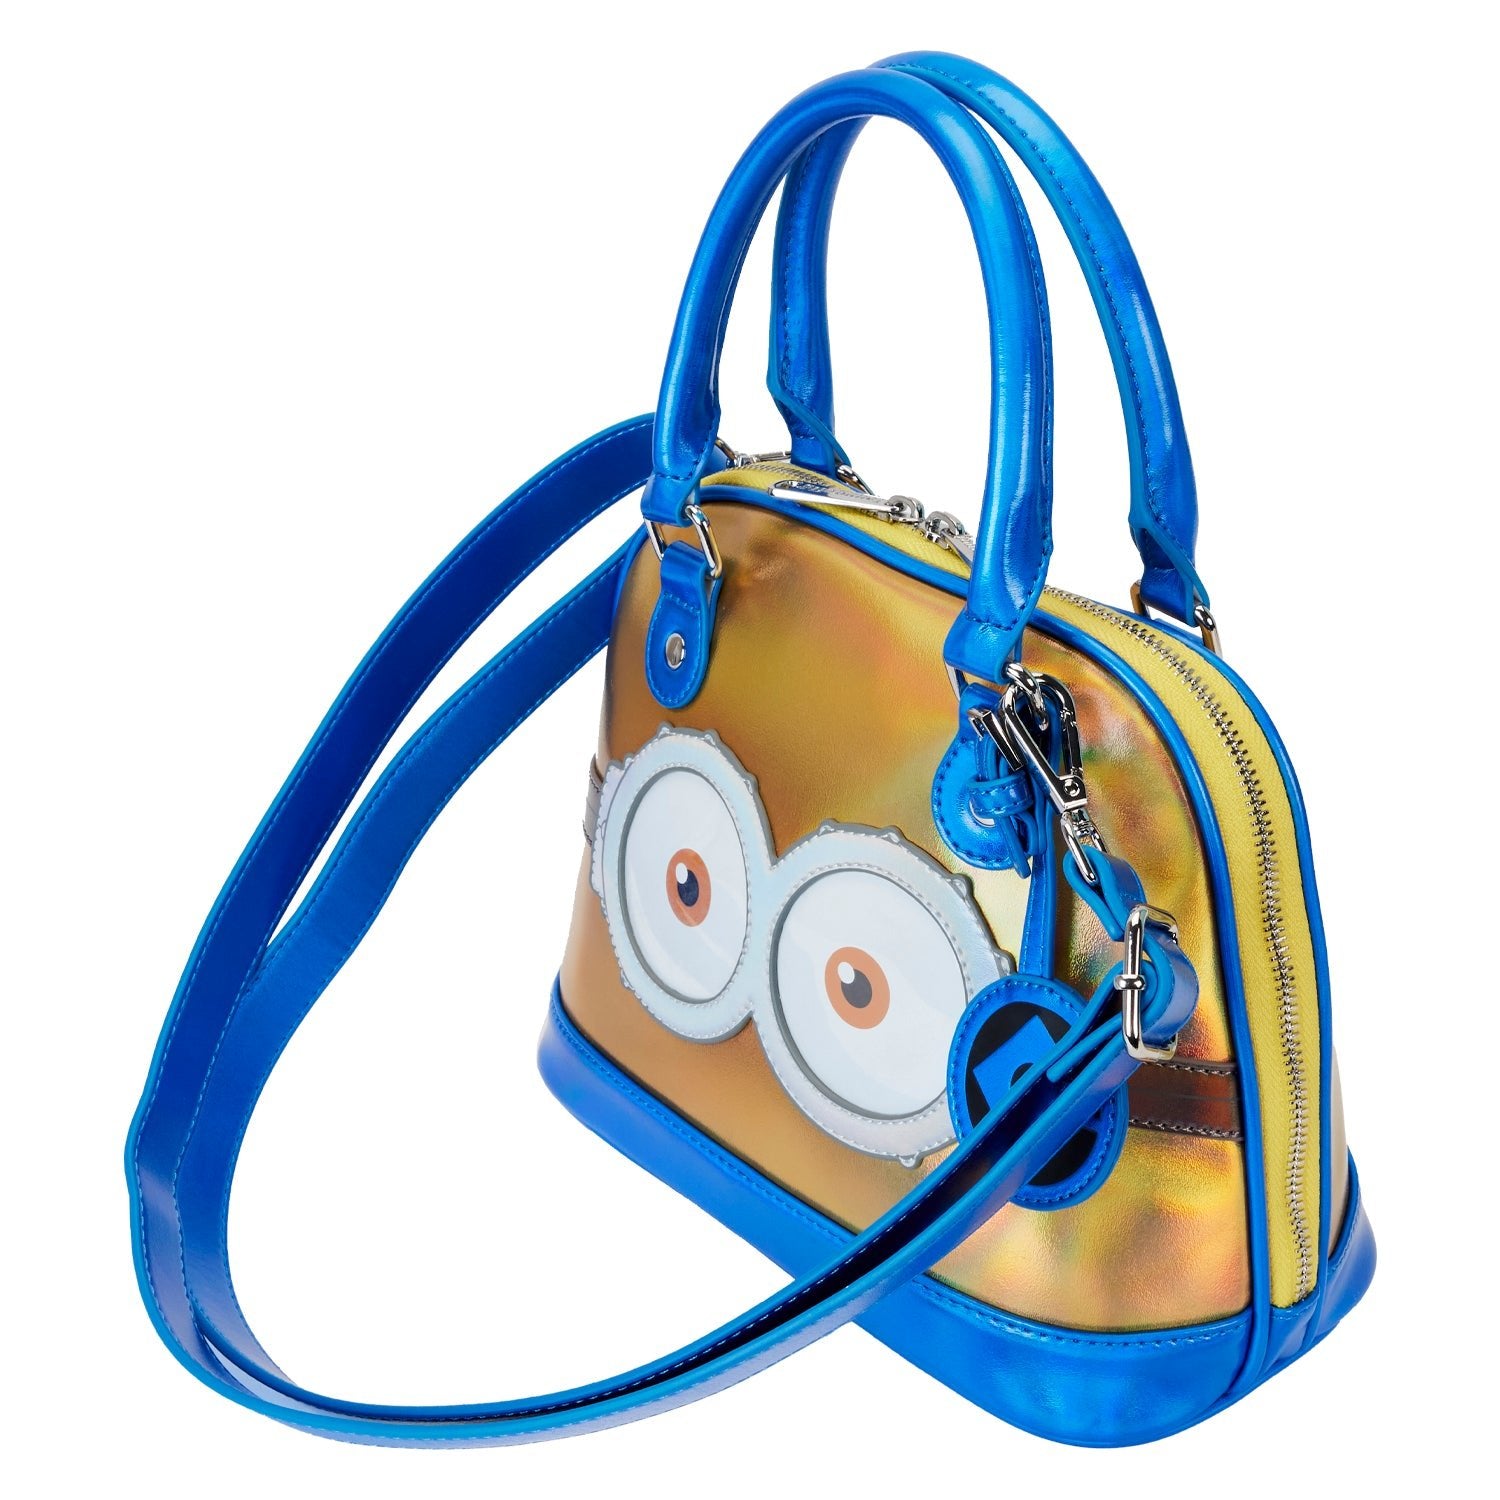 Loungefly x Despicable Me Minions Heritage Dome Cosplay Crossbody Bag - GeekCore